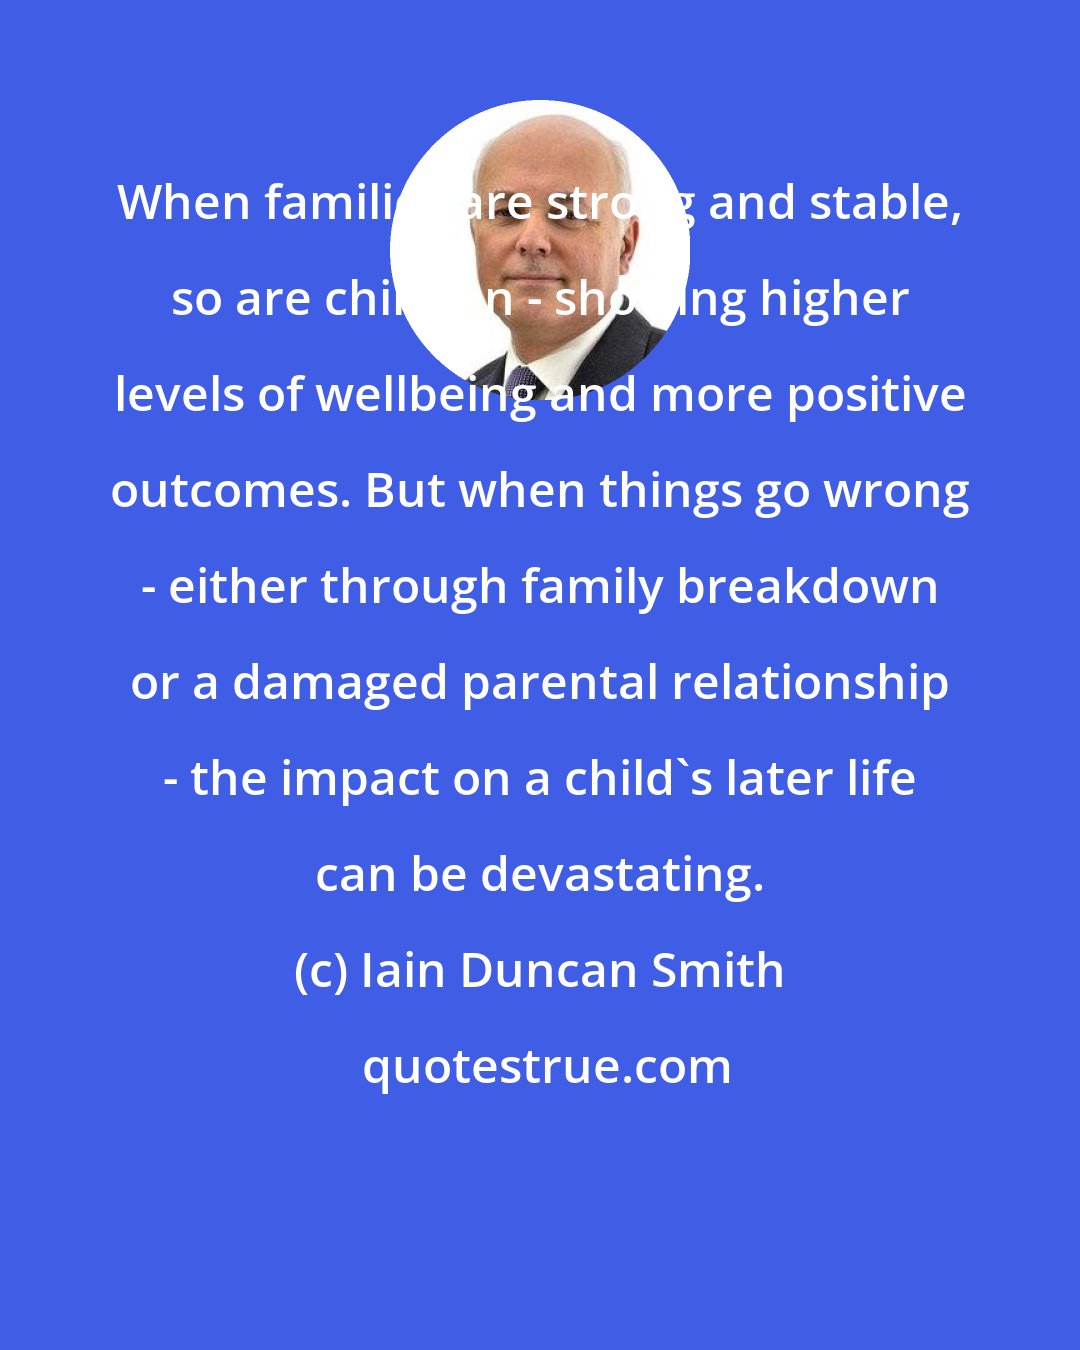 Iain Duncan Smith: When families are strong and stable, so are children - showing higher levels of wellbeing and more positive outcomes. But when things go wrong - either through family breakdown or a damaged parental relationship - the impact on a child's later life can be devastating.